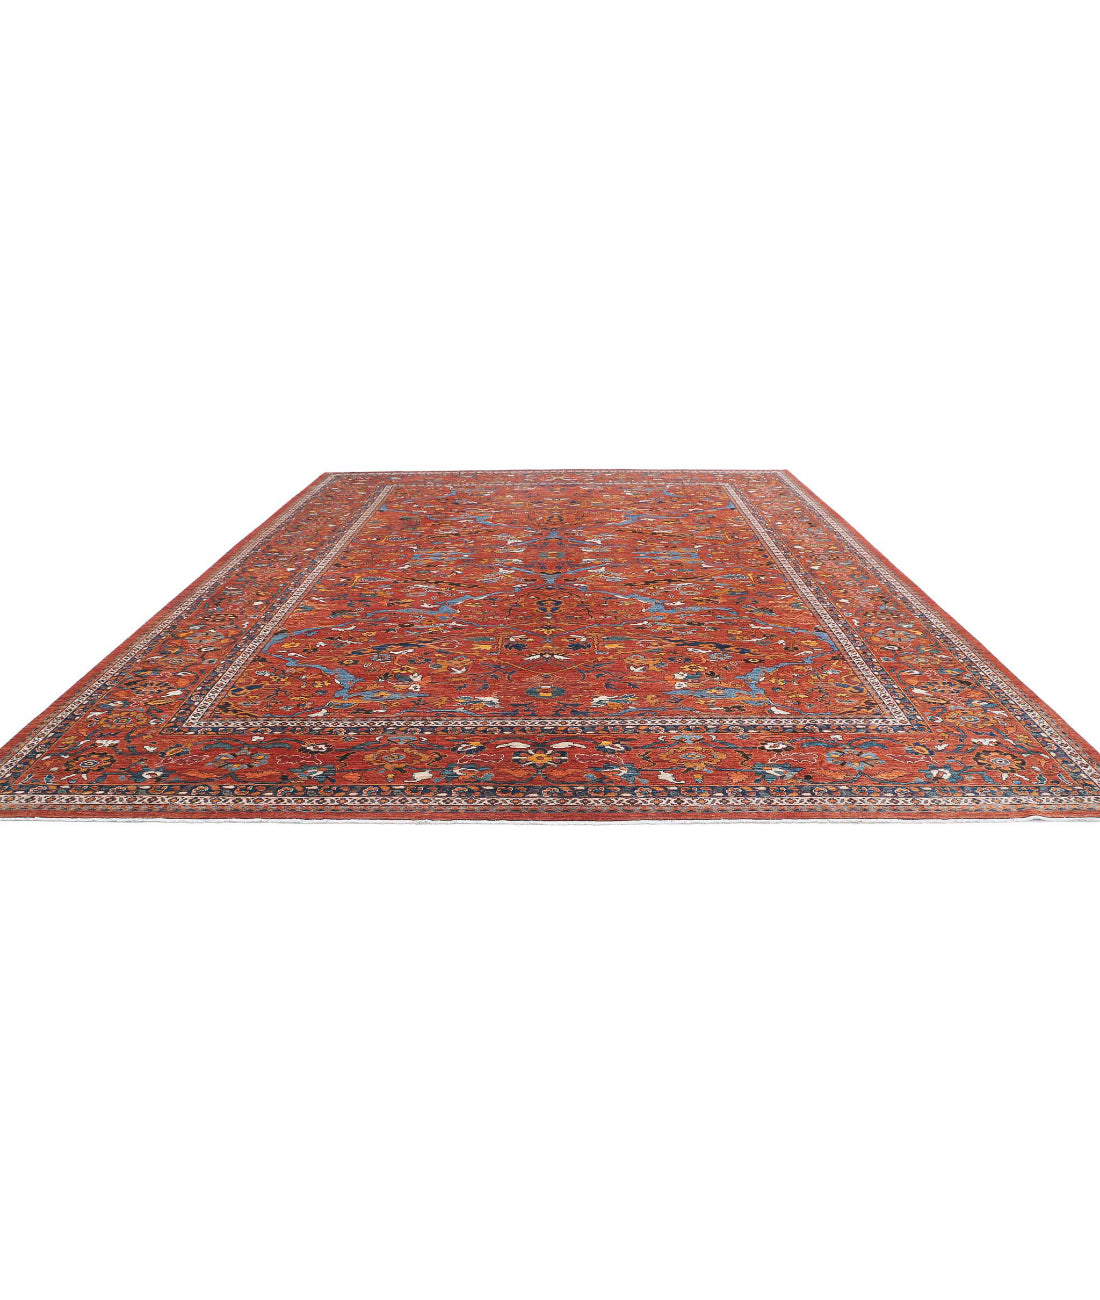 Hand Knotted Nomadic Caucasian Humna Wool Rug - 13'5'' x 16'3'' 13'5'' x 16'3'' (403 X 488) / Red / Red